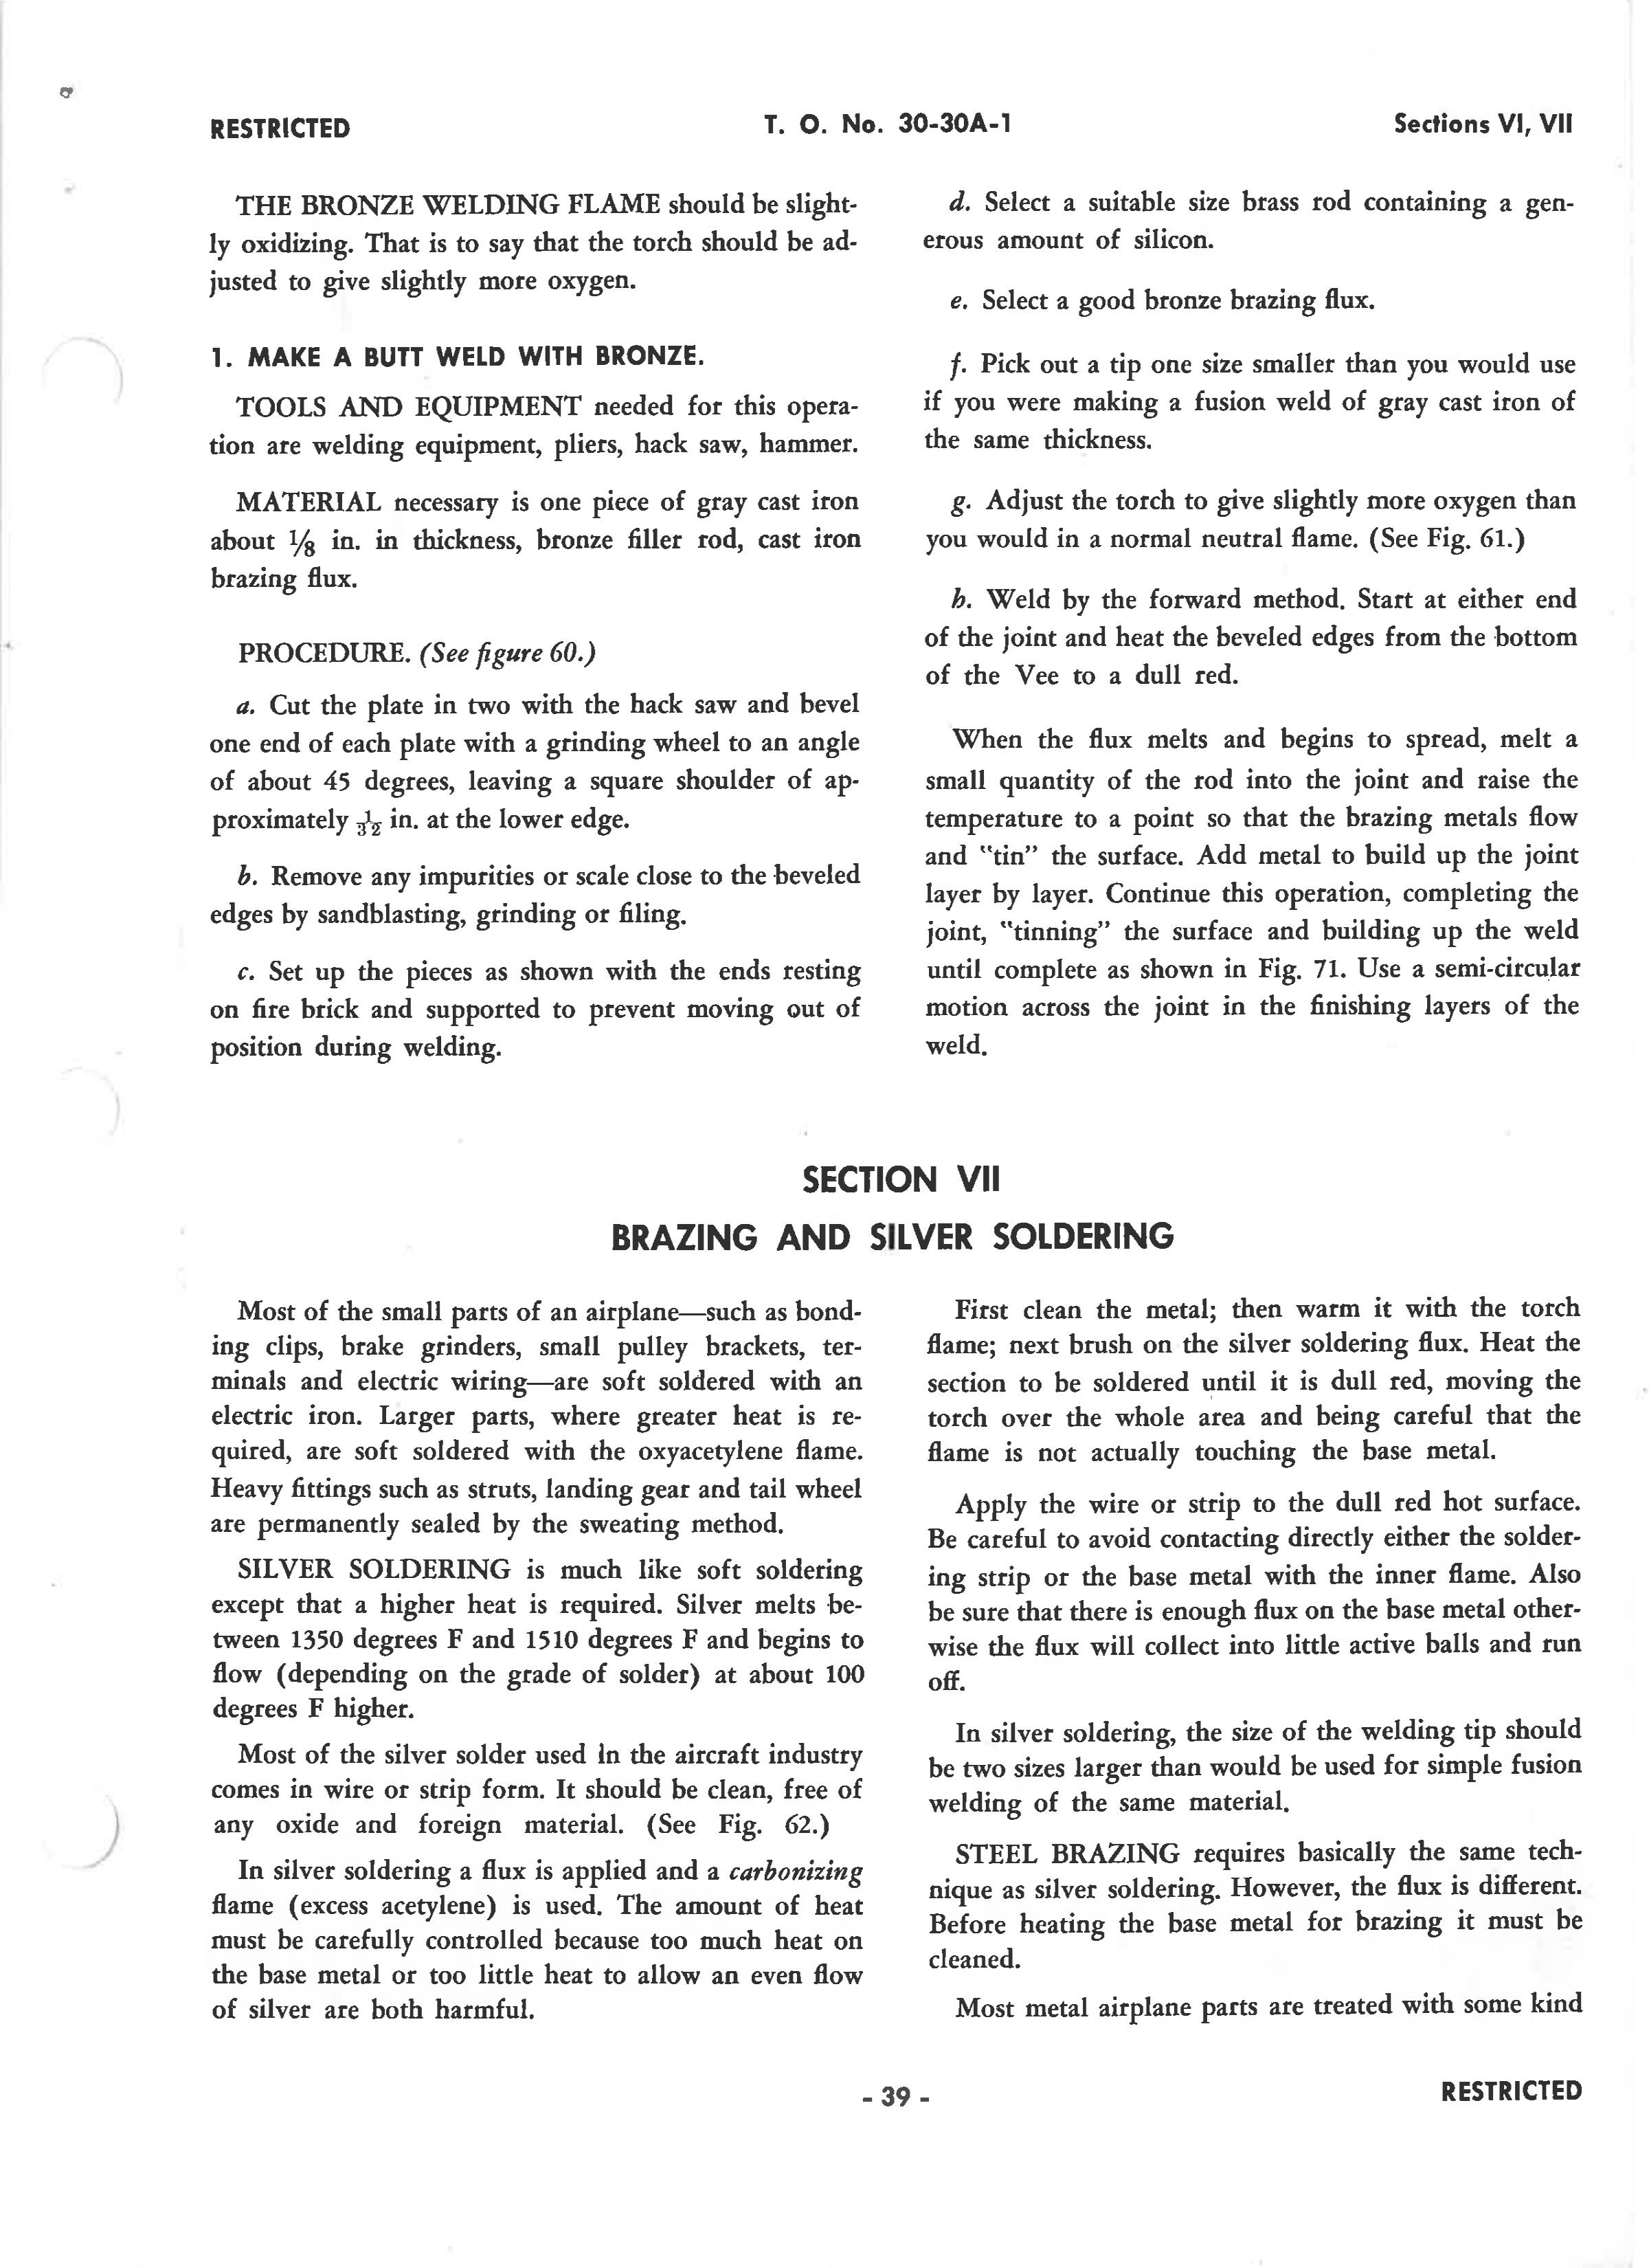 Sample page 45 from AirCorps Library document: Aircraft Welding Specialist - Information Guide